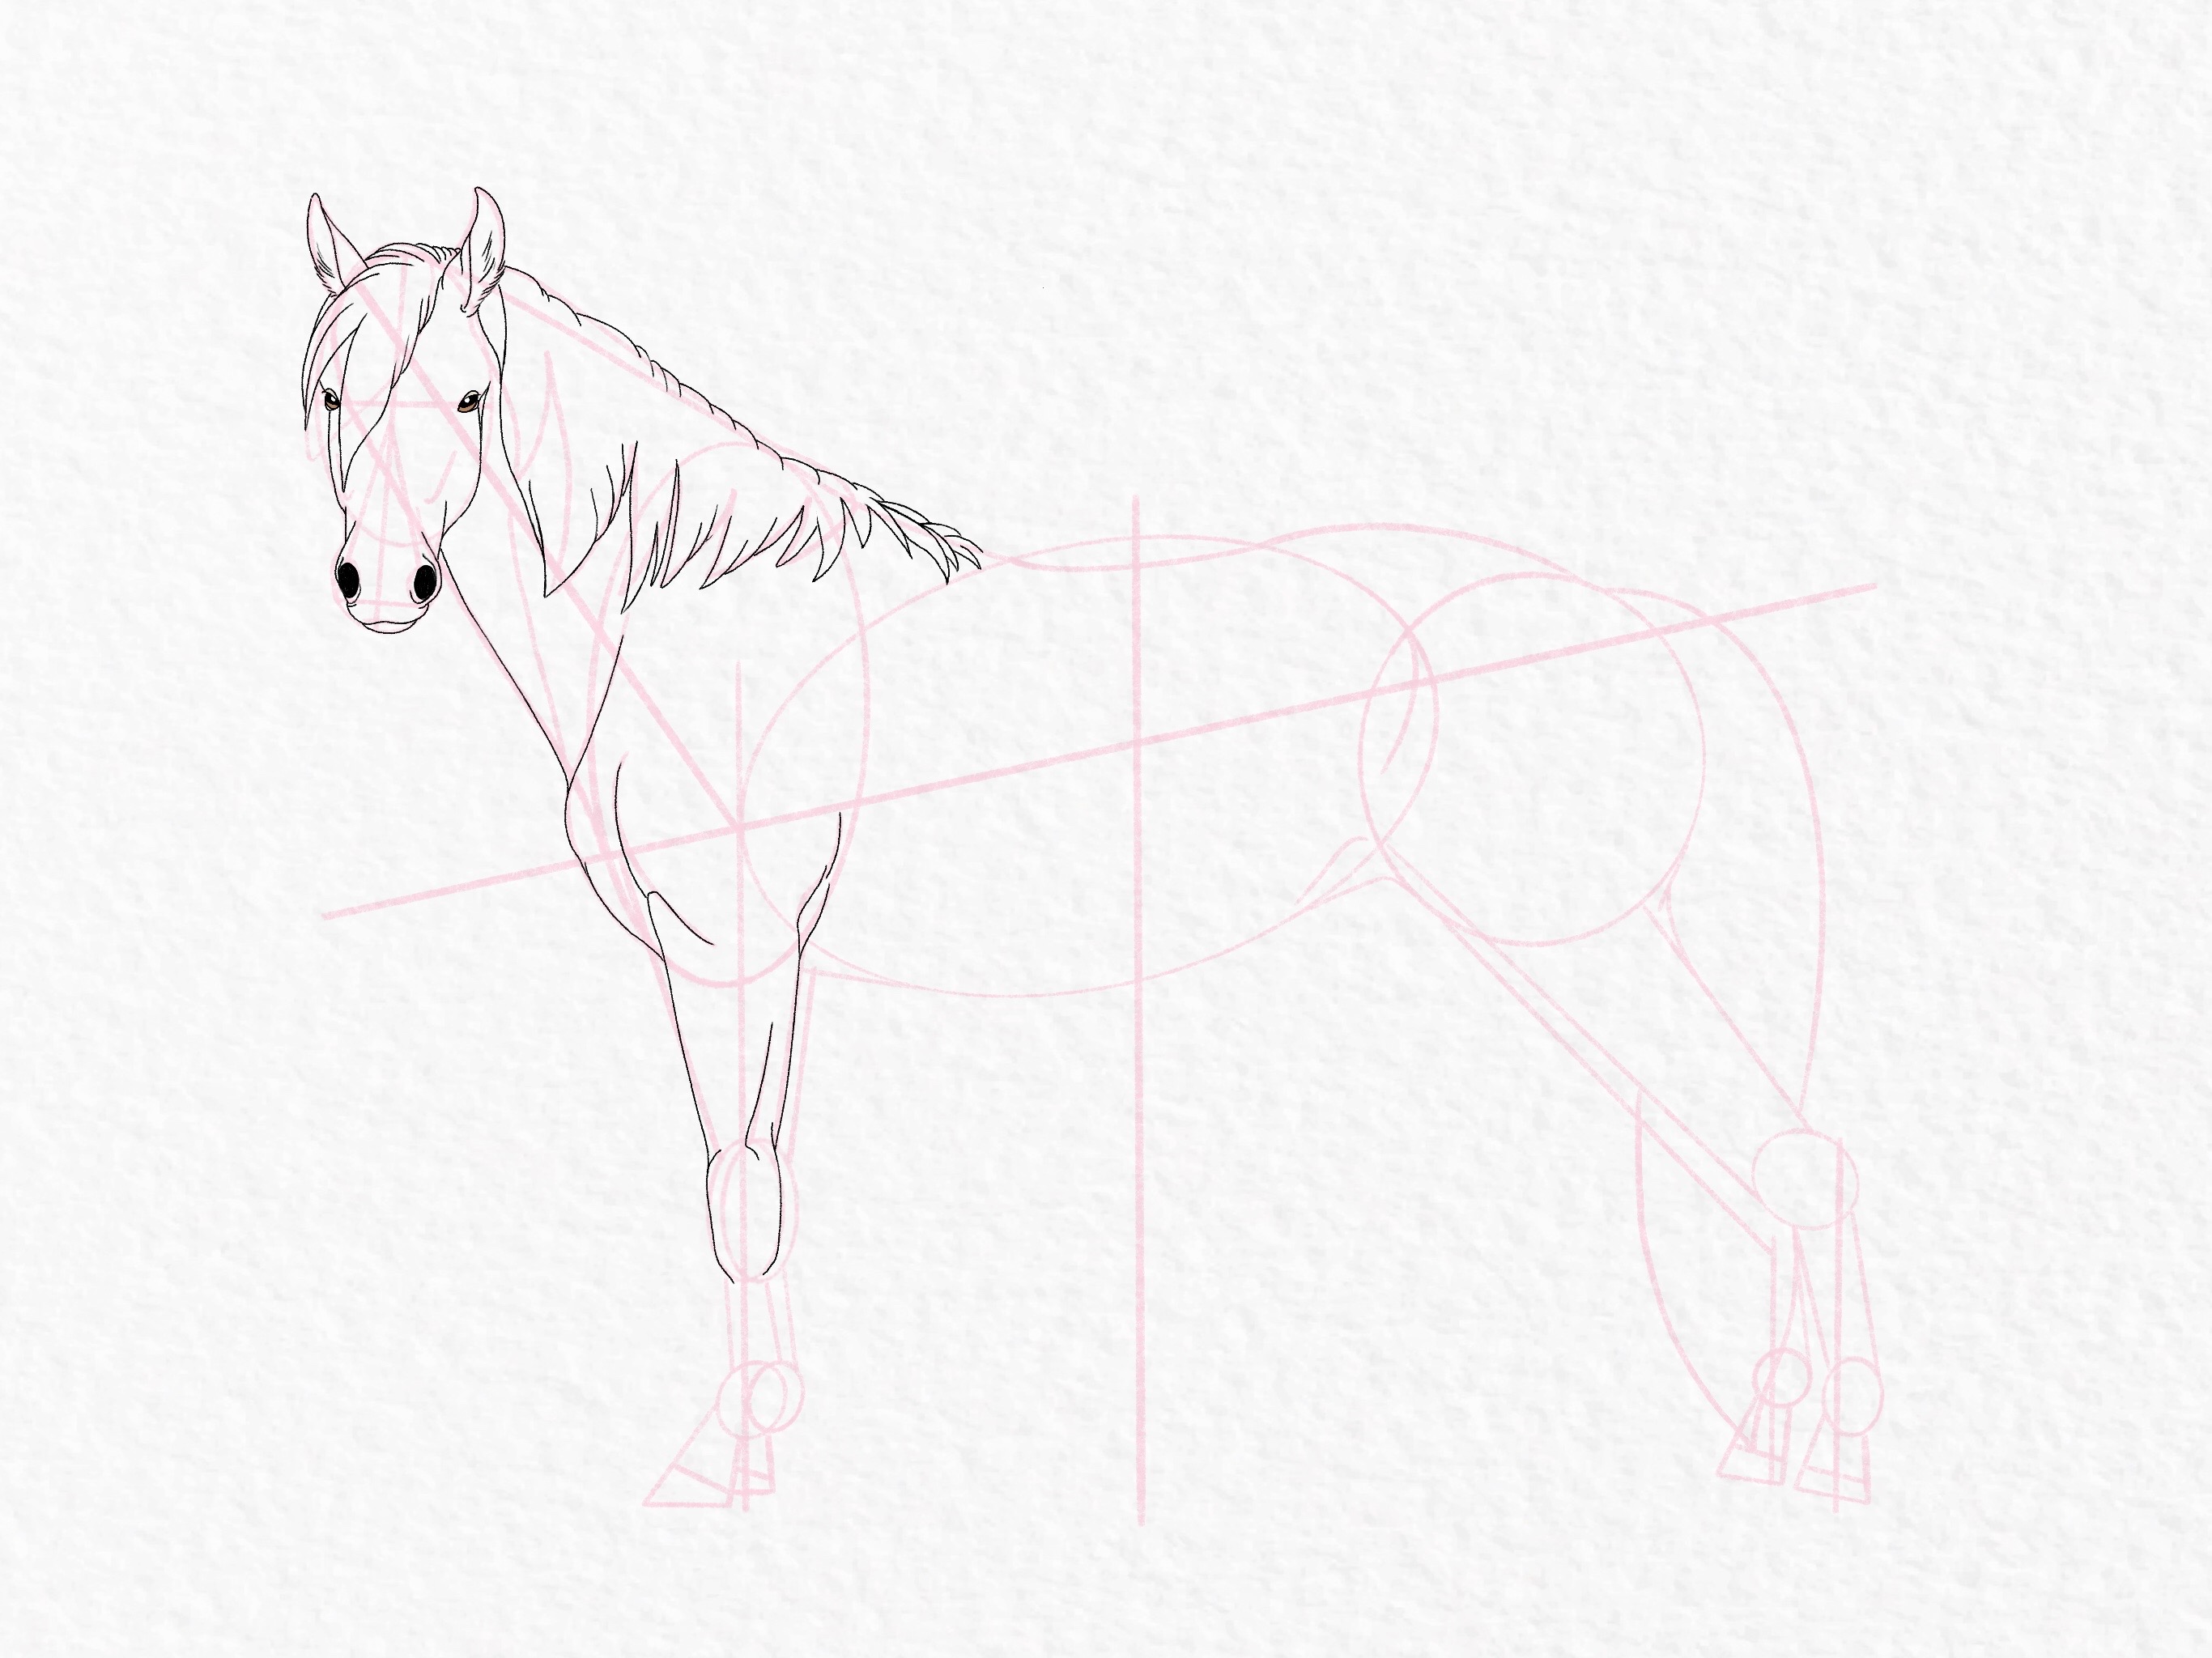 How to Draw a Horse - Guide to Perfecting Your Own Drawing of a Horse